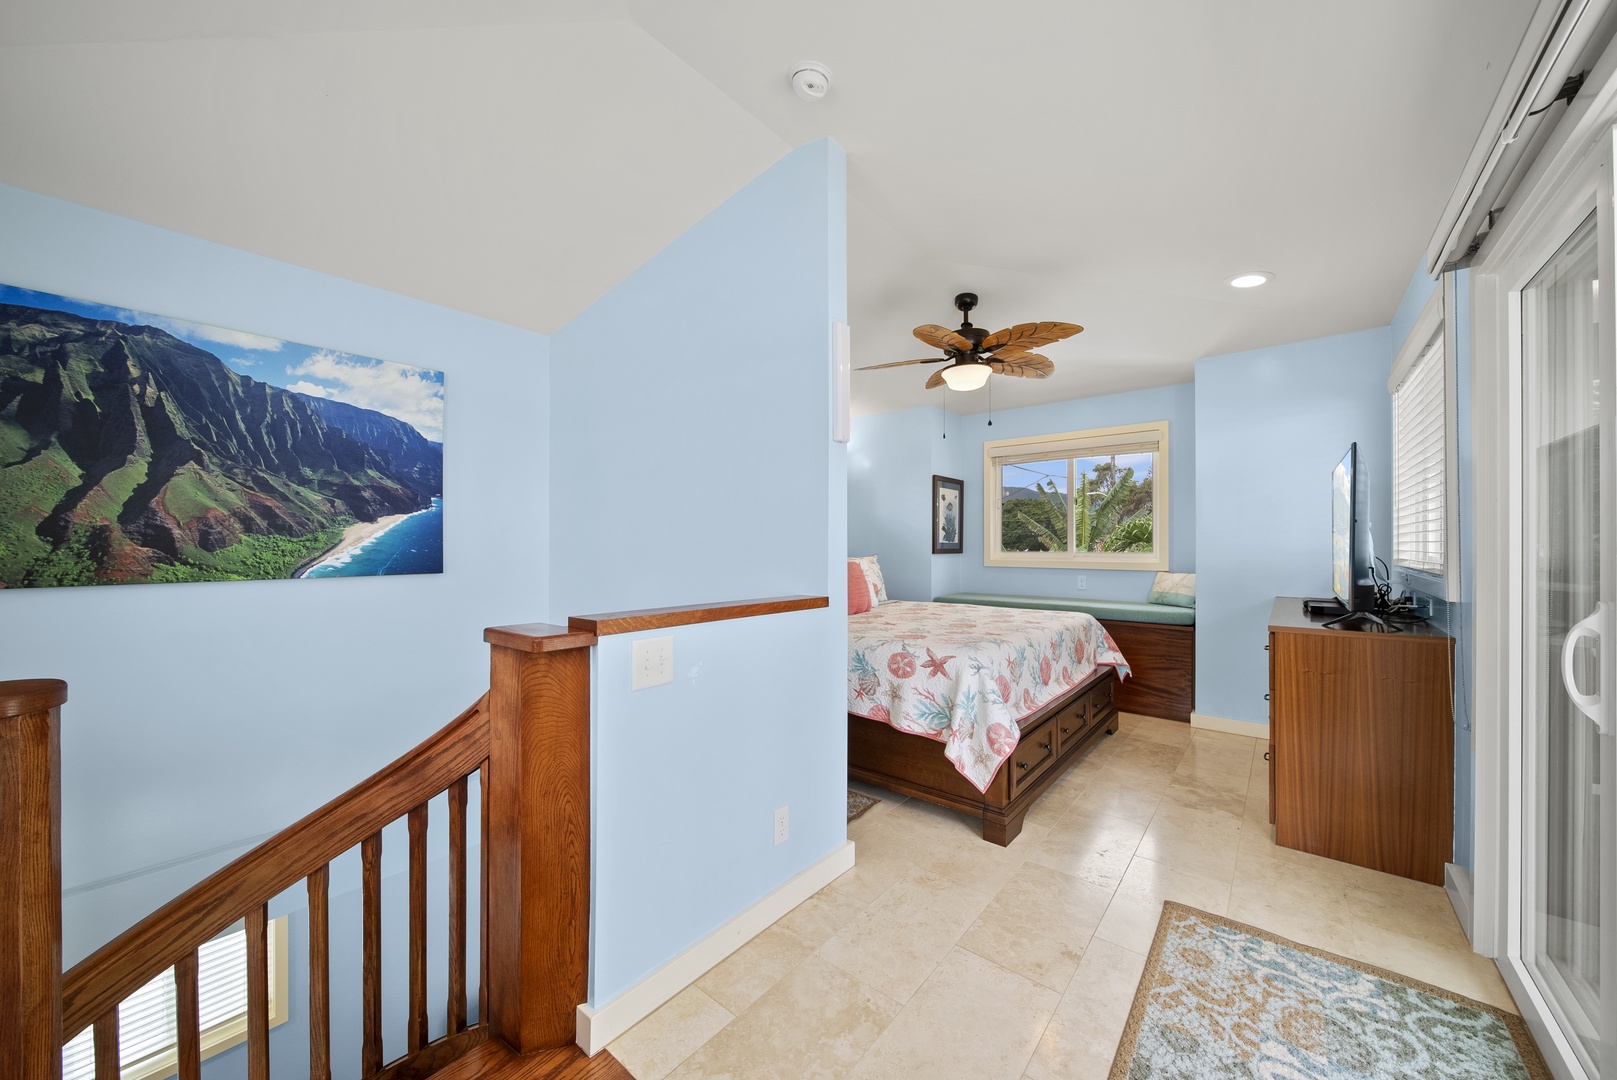 Waialua Vacation Rentals, Kala'iku Estate - The one and only bedroom is located upstairs